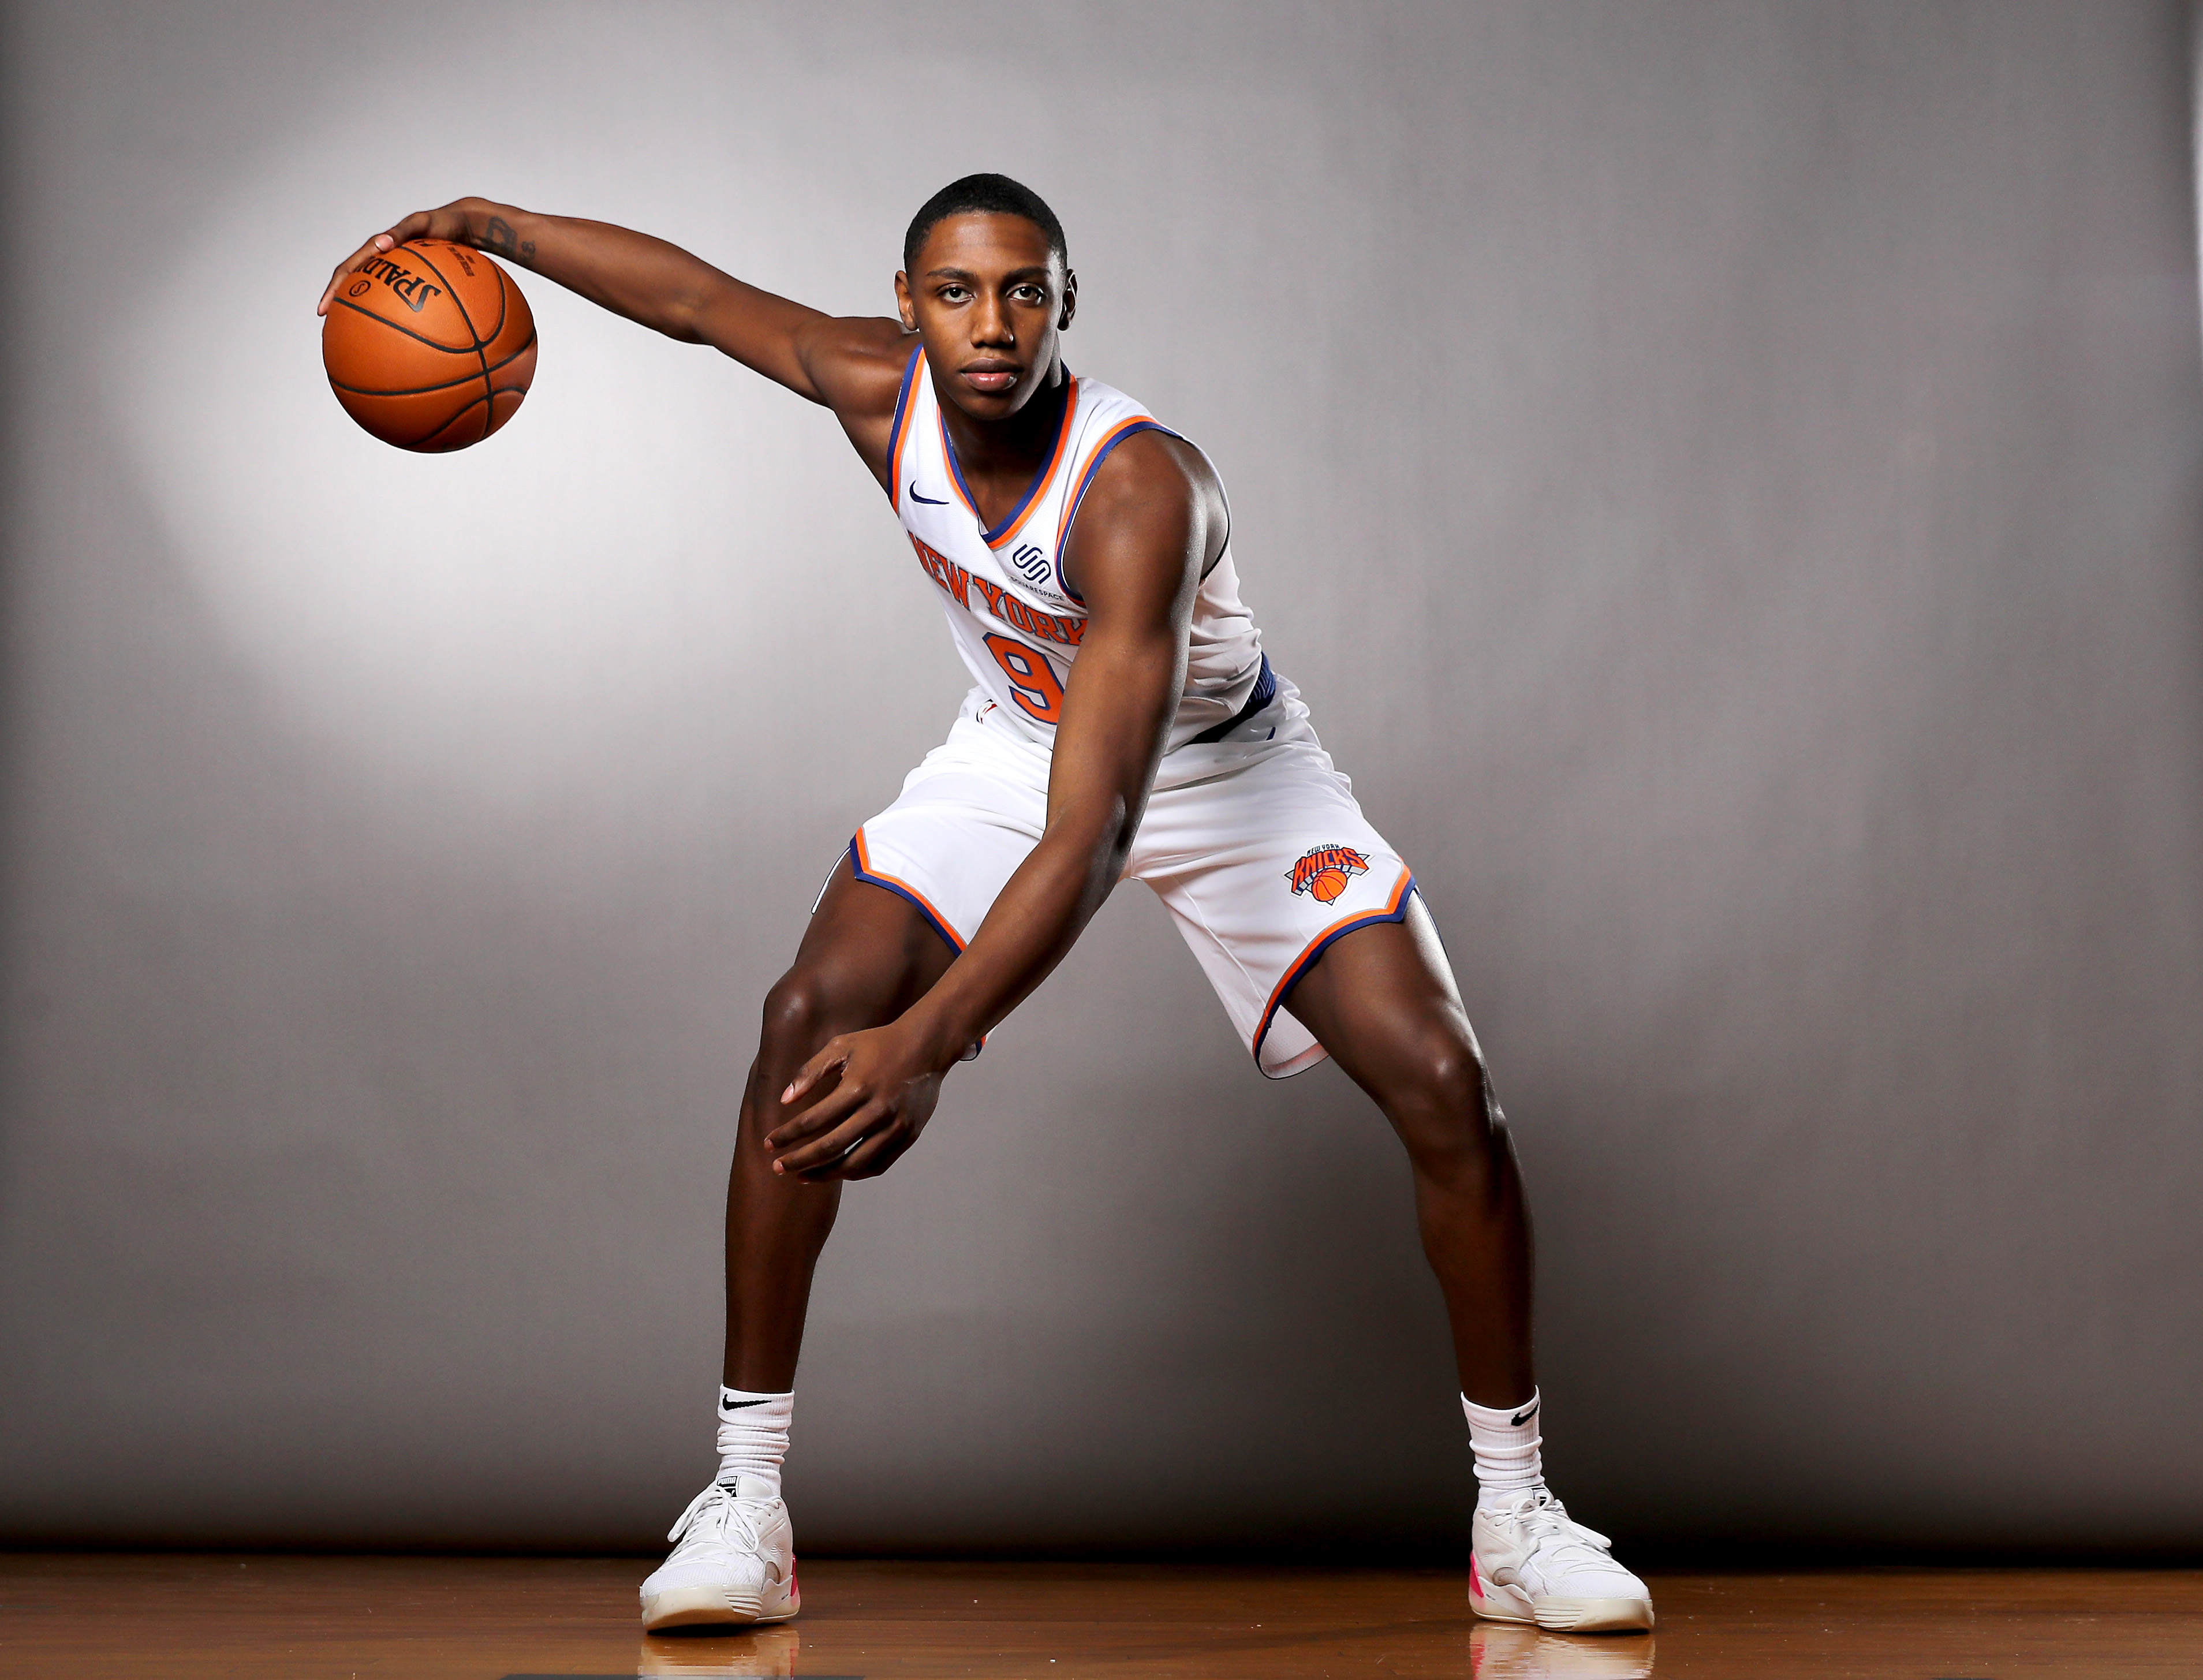 Puma shoes are seen worn by RJ Barrett of the New York Knicks